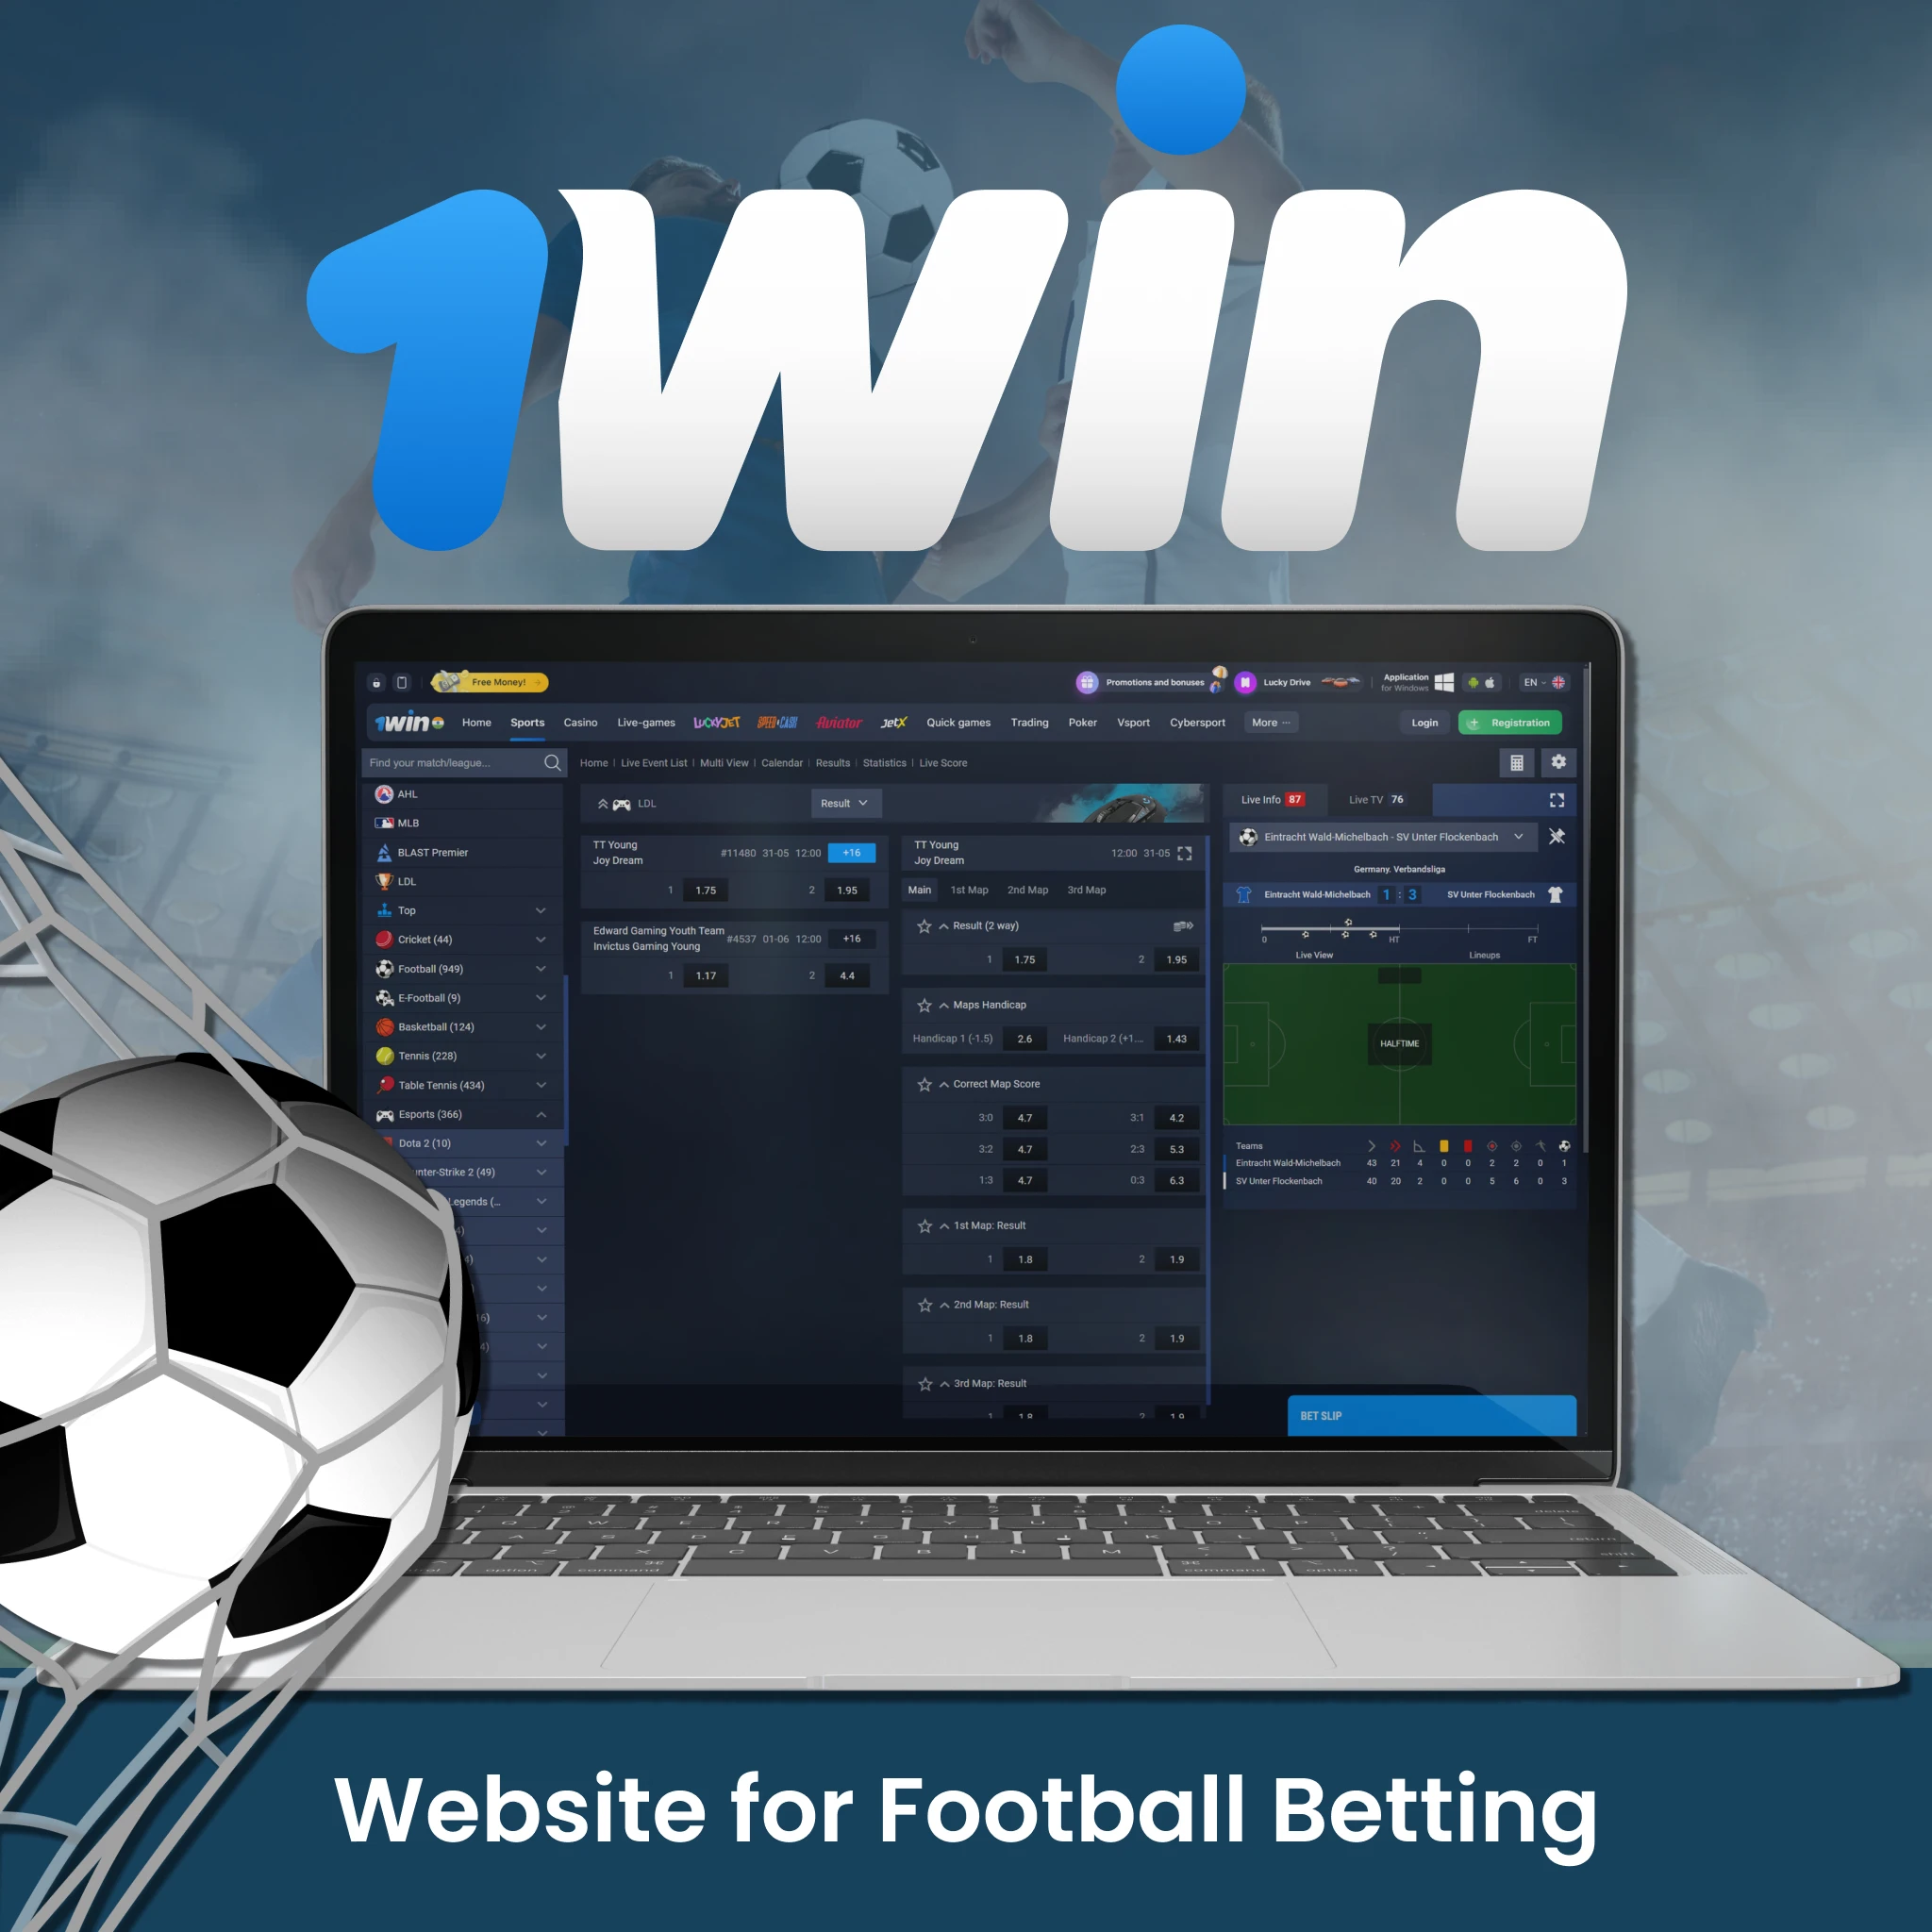 1win is a platform that will be able to satisfy any Indian users' needs regarding soccer betting.